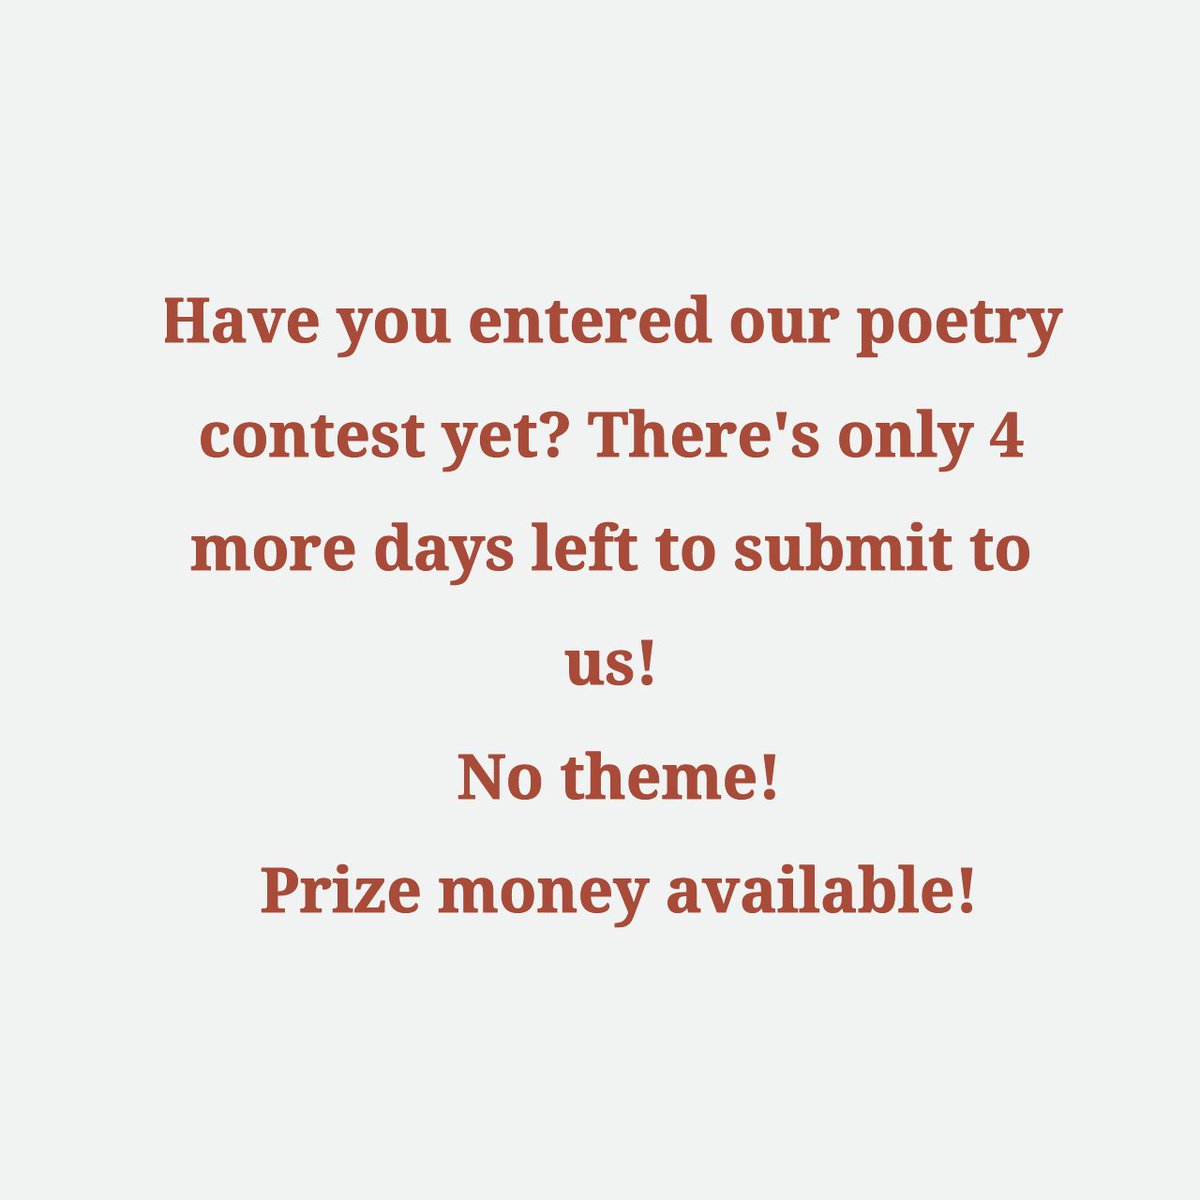 Check out our poetry contest via our website in our bio! 4 days left!
#poetsofinstagram #poetryofinstagram #poetrymagazine #poetsociety #poem #poetrygram #poetrycommunity #poet #poetrylovers #Poetry